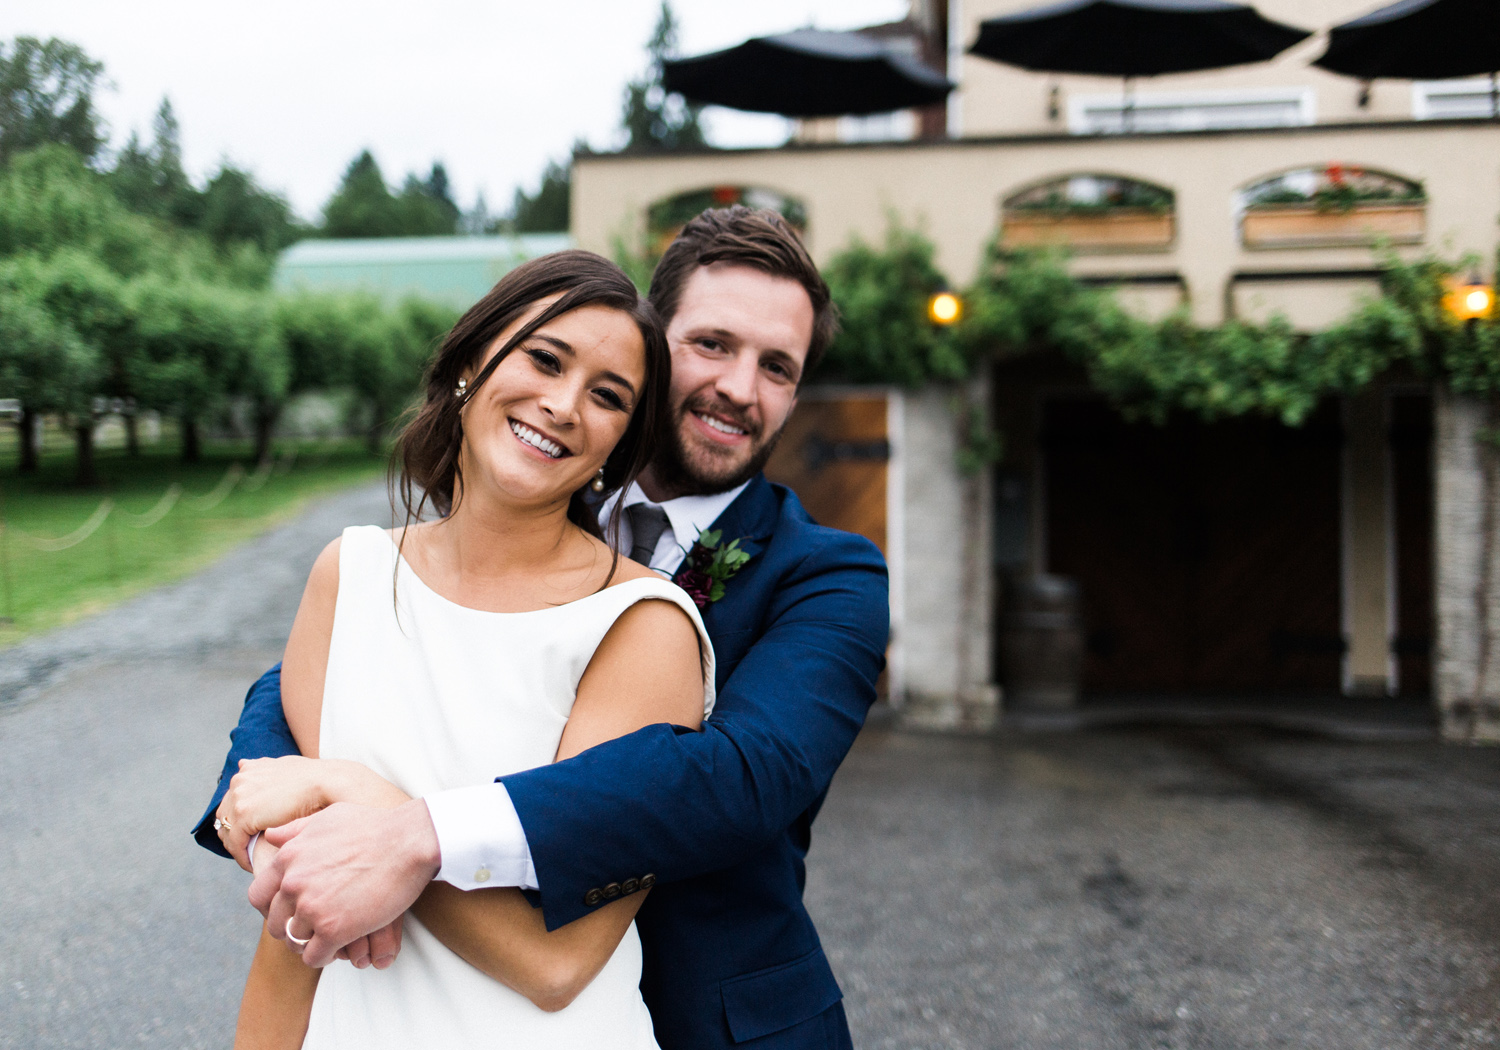 delille cellars woodinville winery wedding venue bride and groom photography.jpg